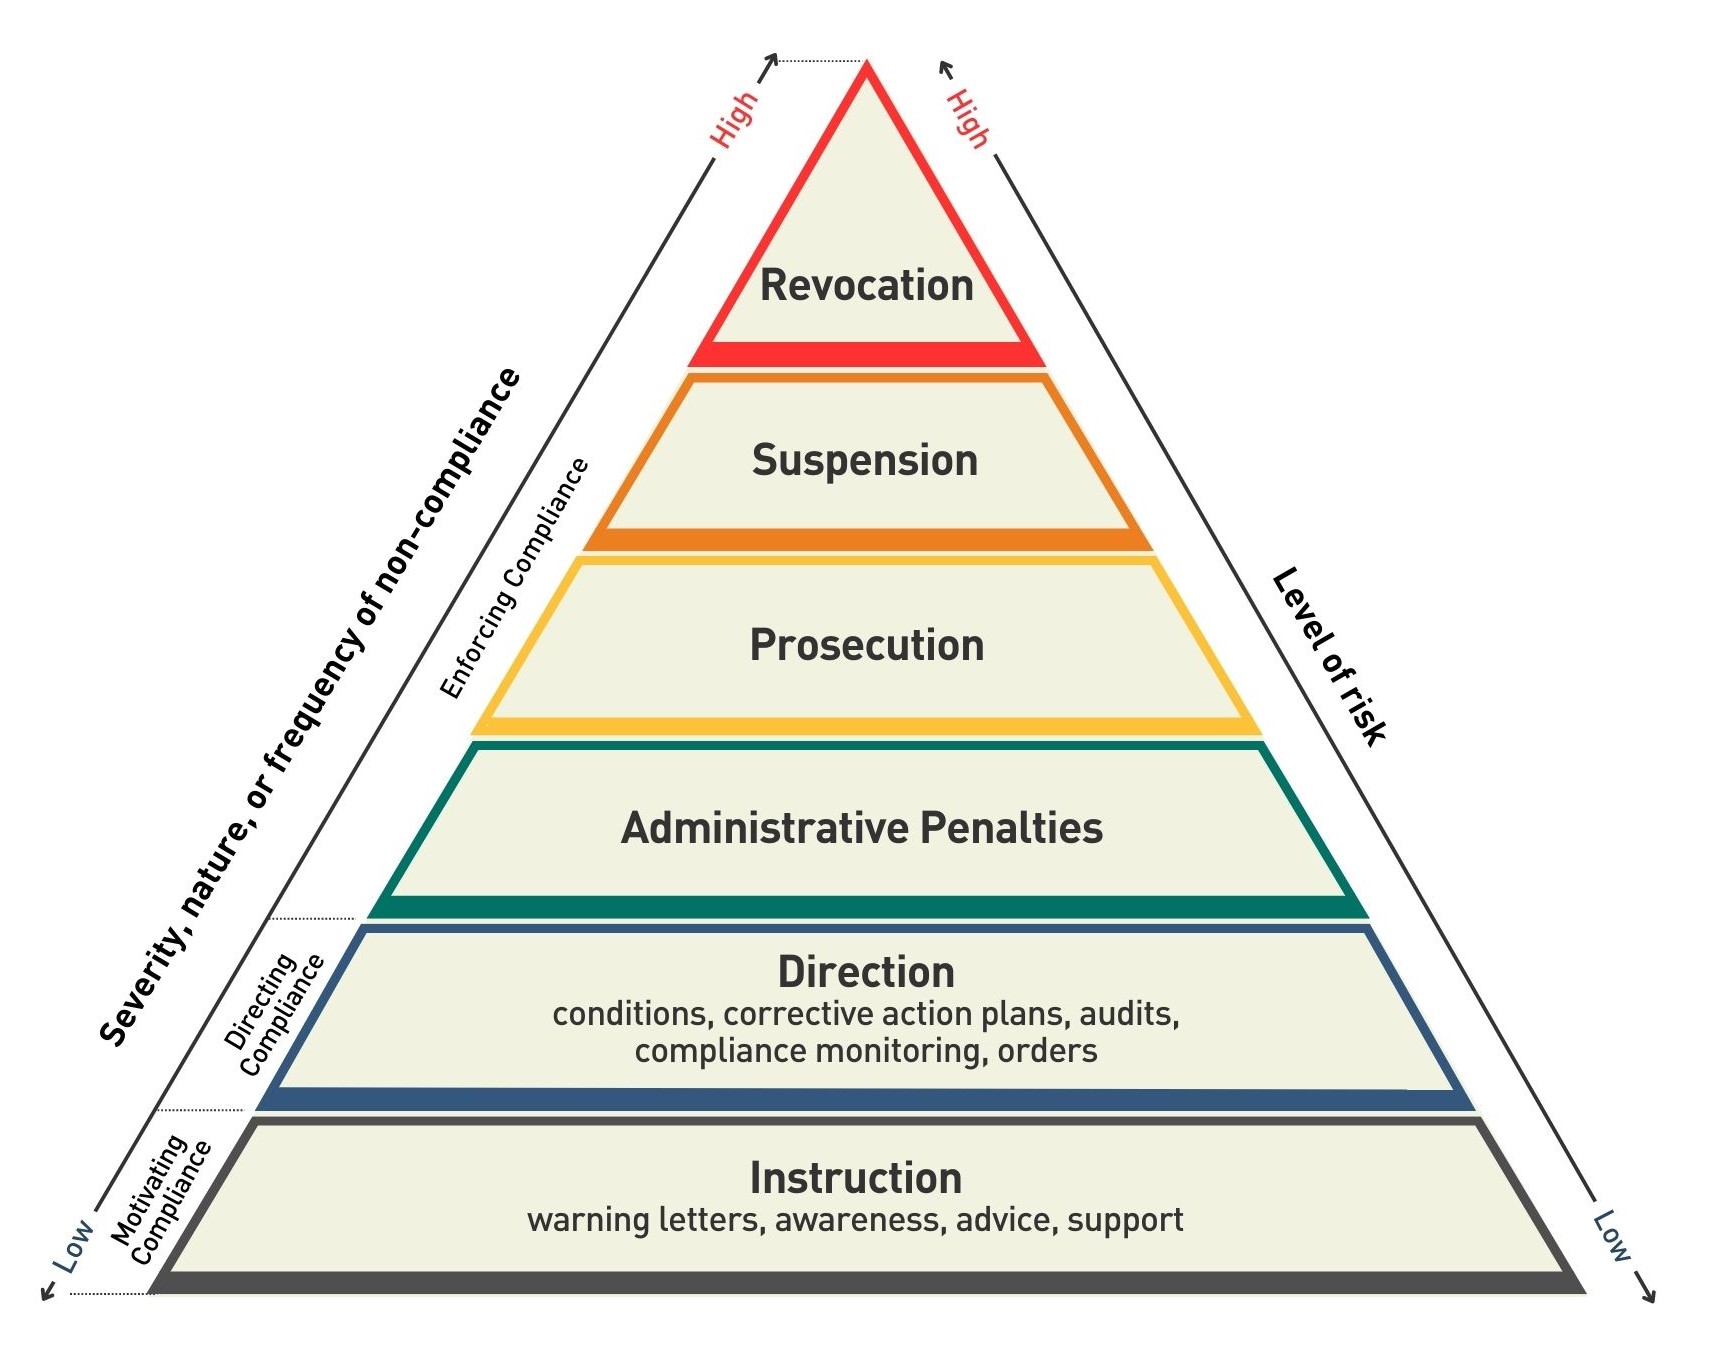 pyramid shows a range of actions the Director of Licensing may take